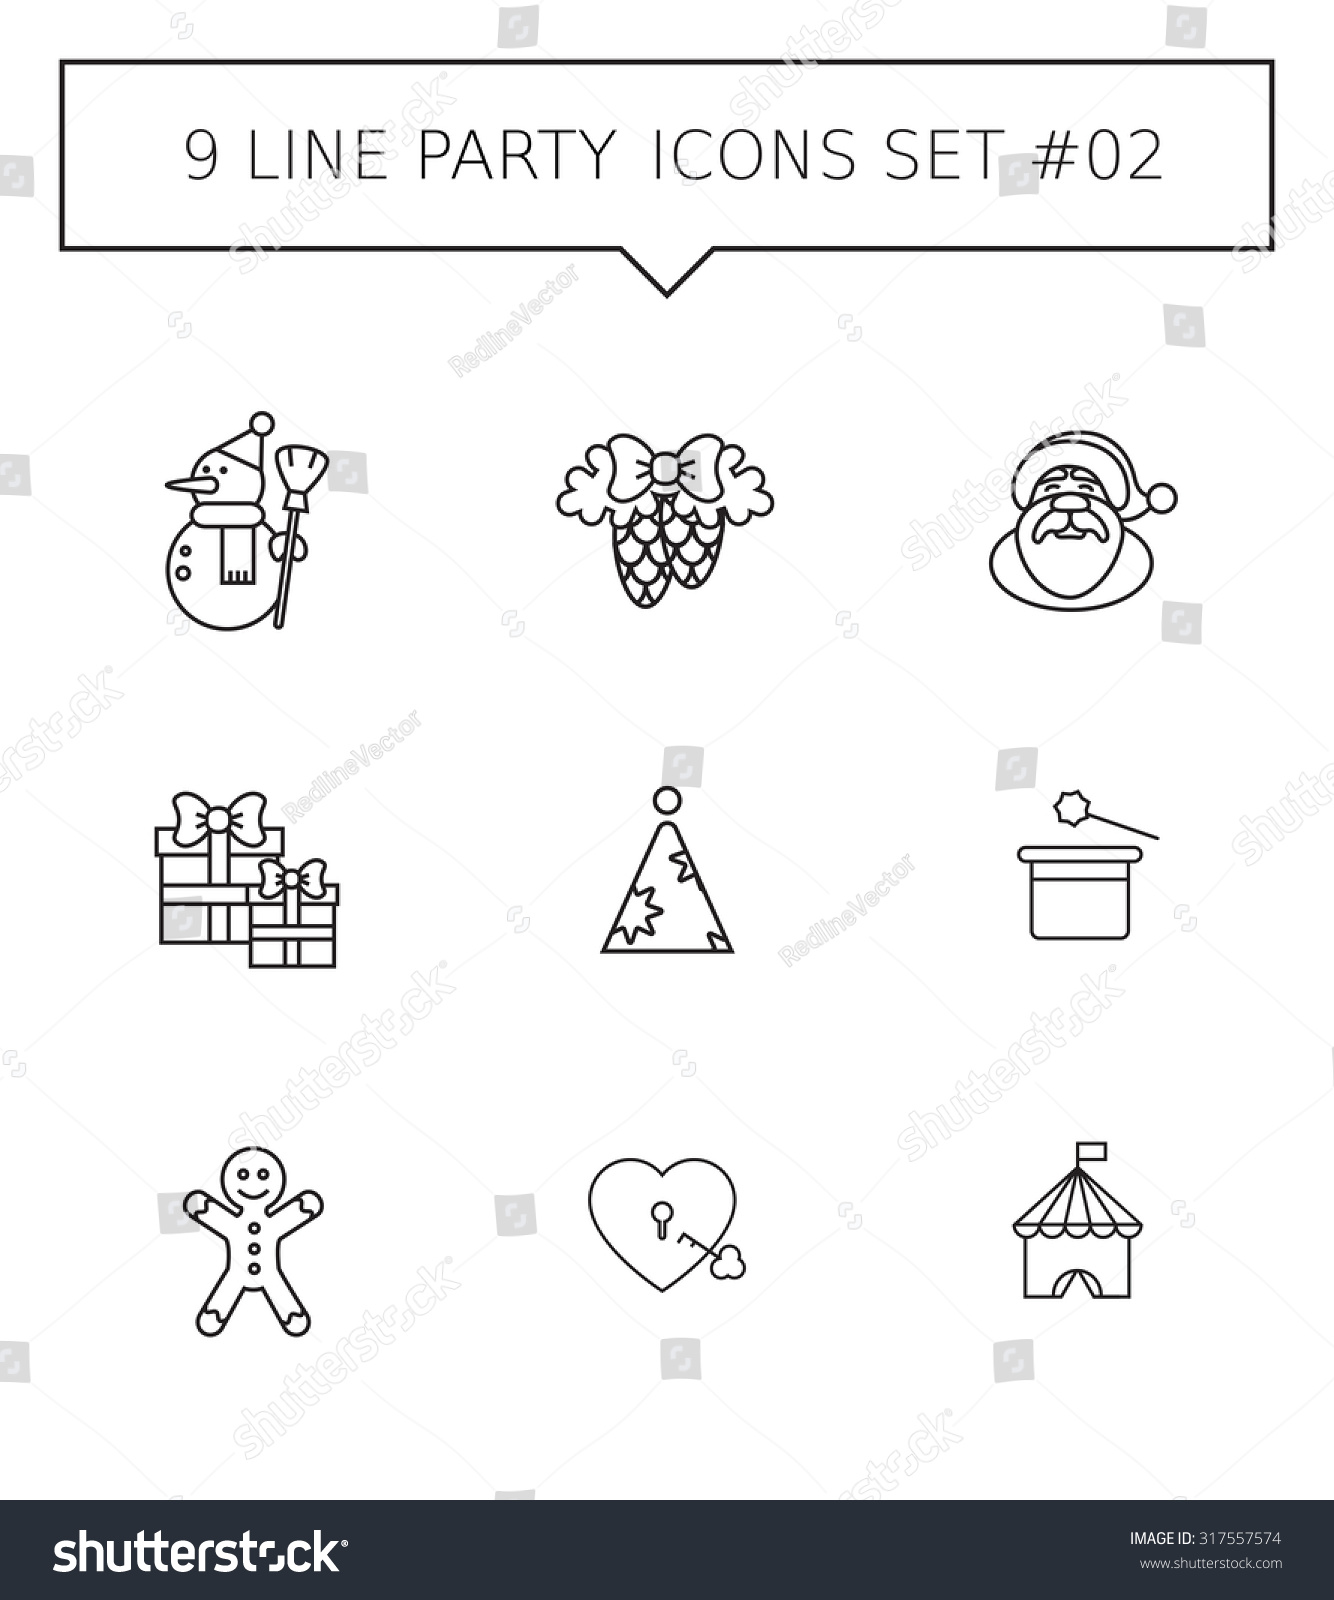 SVG of Set of vector icons with party and celebration concepts, isolated on white svg